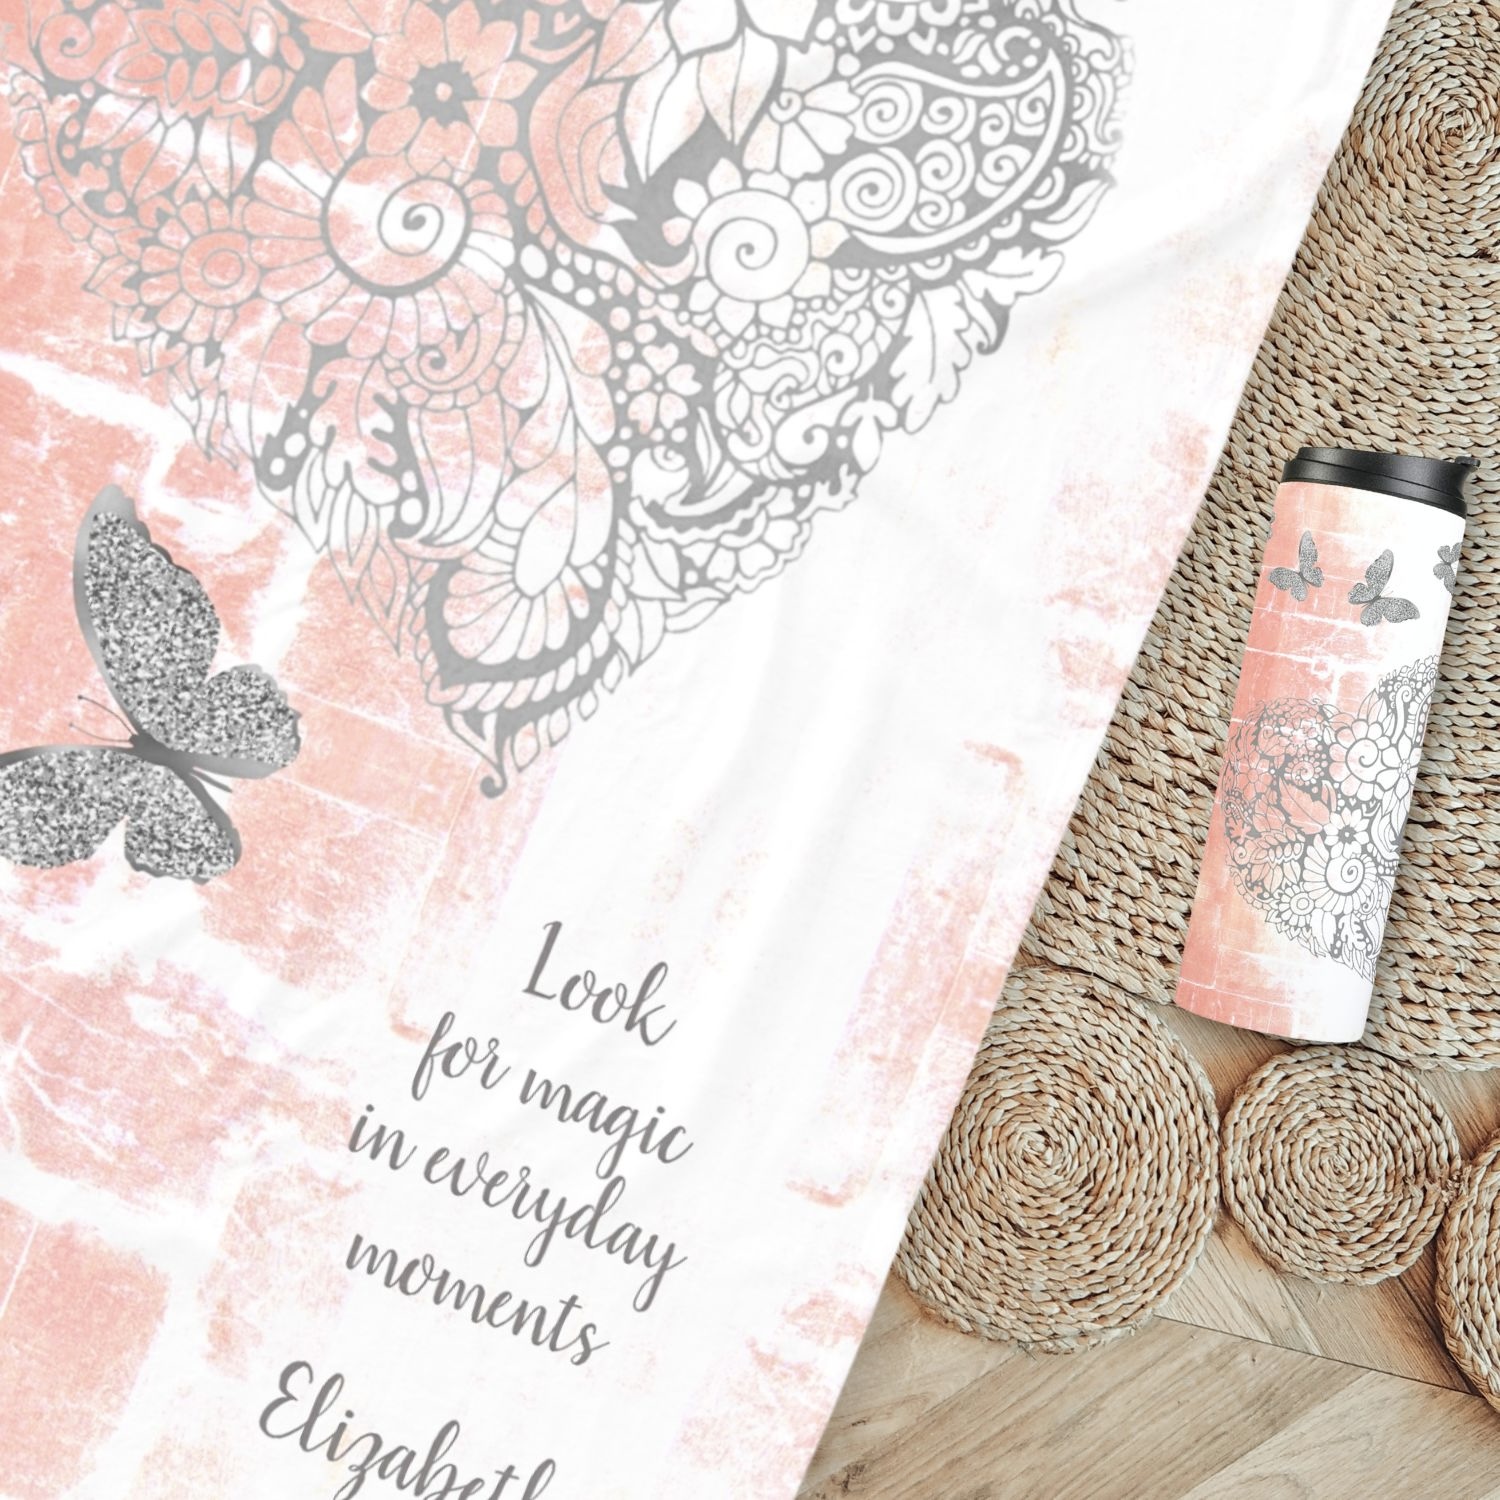 A fleece blanket with a rustic peach design, including a gray heart at its center surrounded by silver butterflies, spread out in a cozy bohemian setting, along with a thermal tumbler with same design.